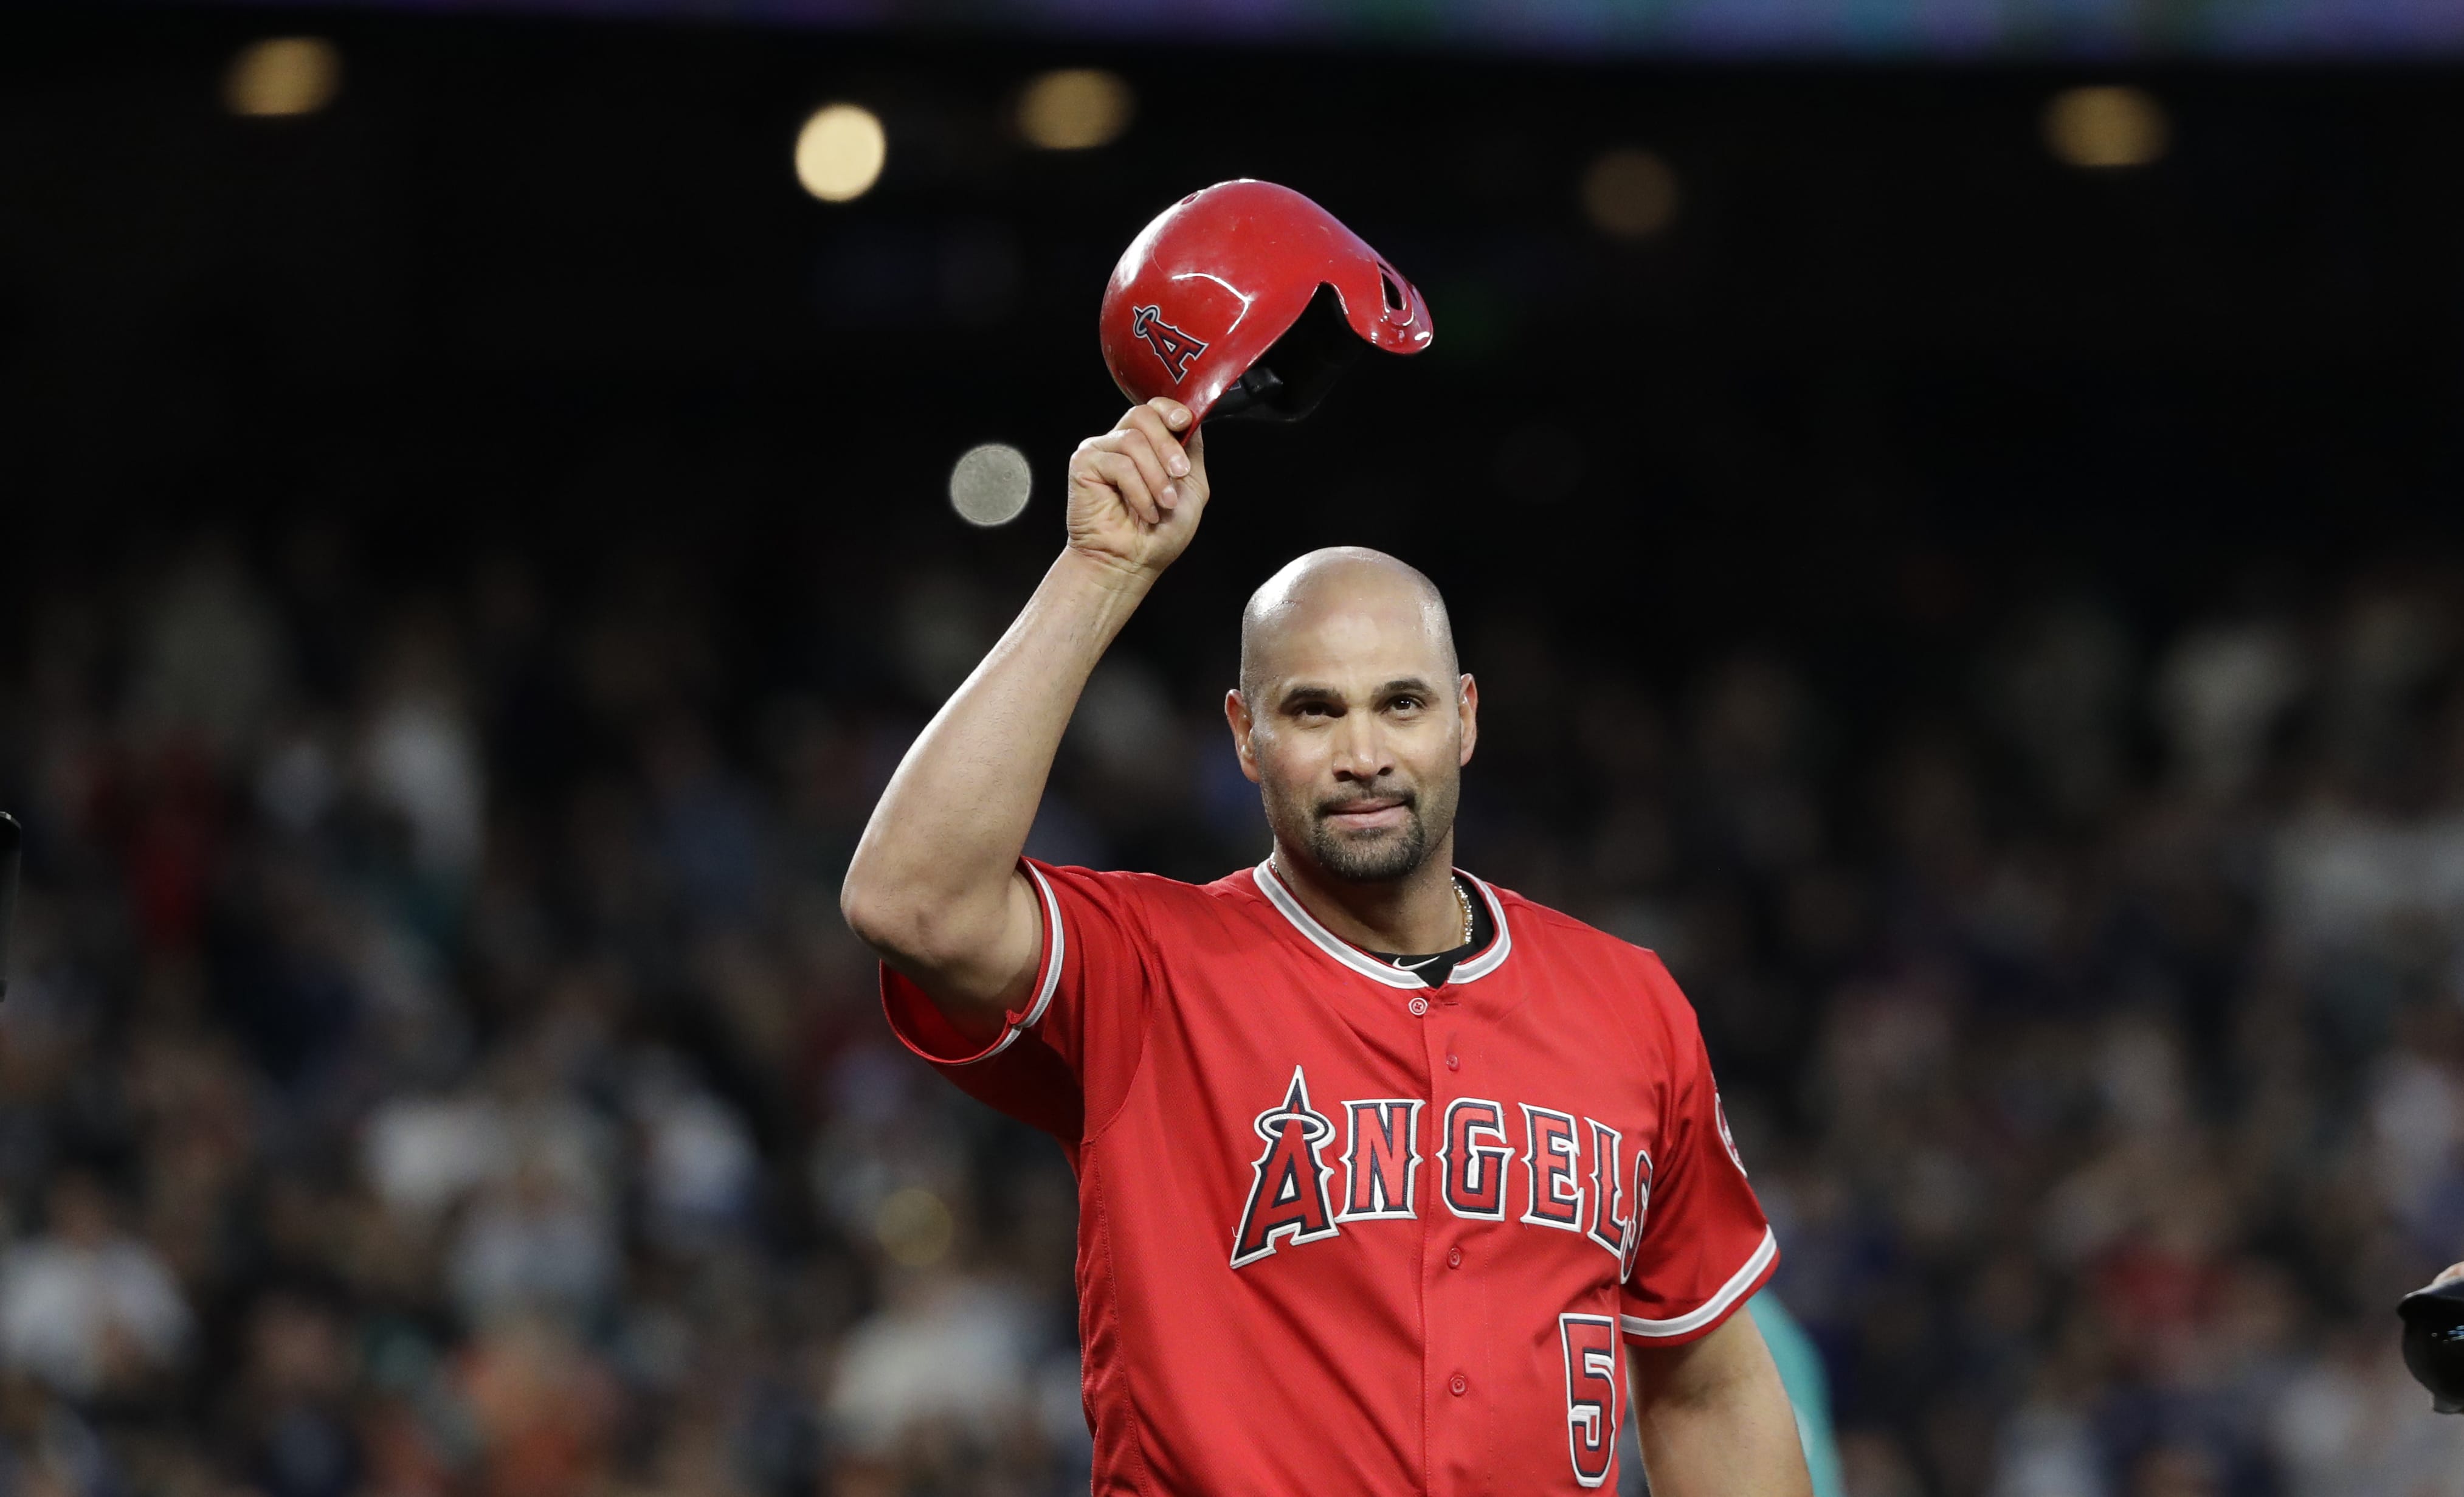 pujols gives jersey